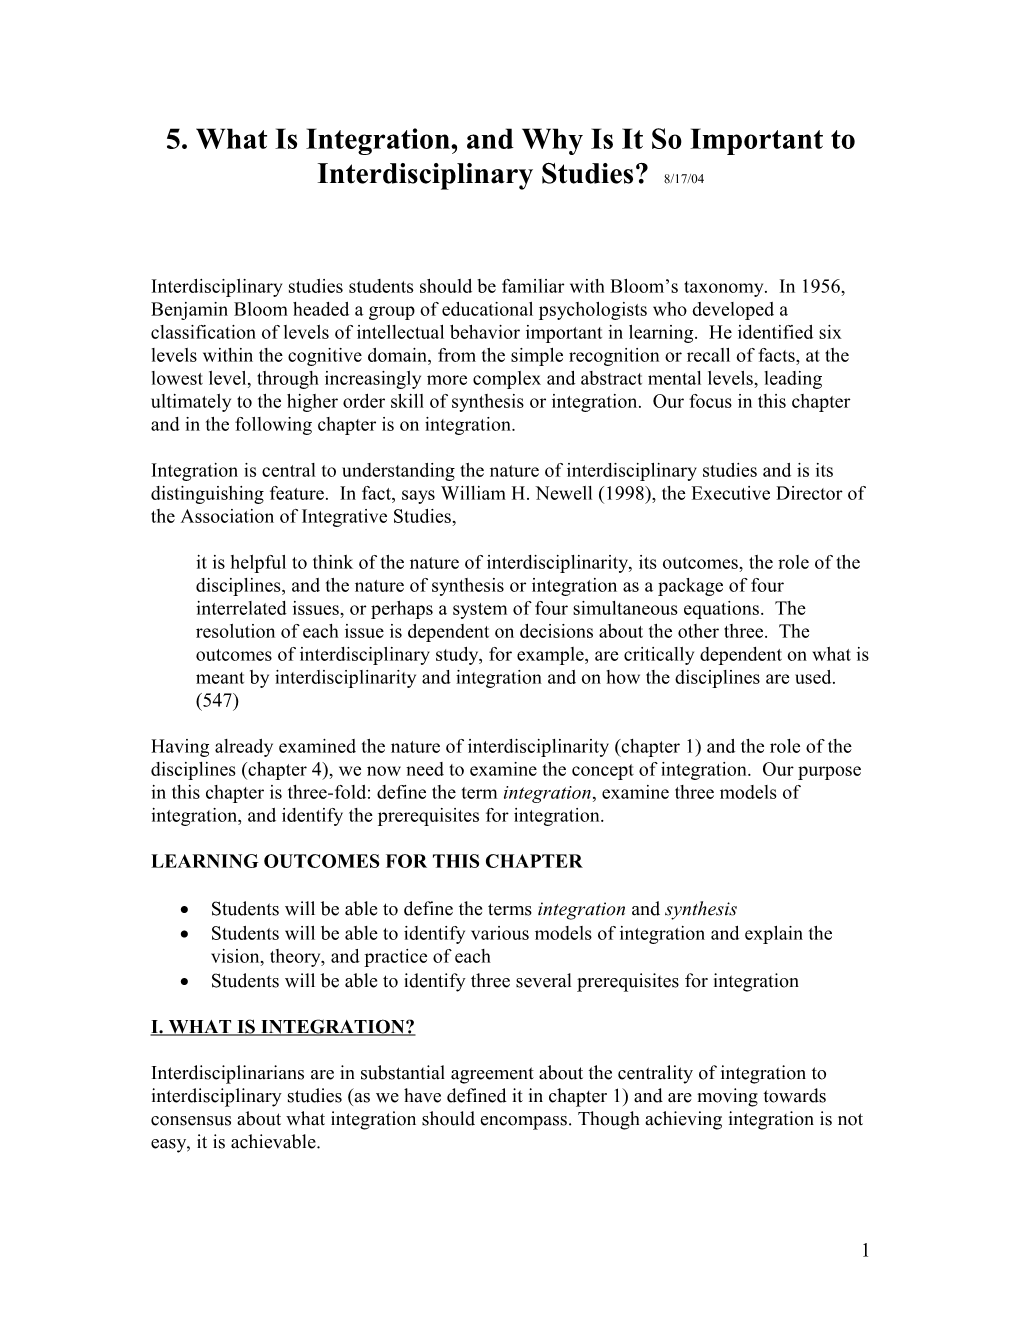 5. What Is Integration, and Why Is It So Important to Interdisciplinary Studies? 8/17/04